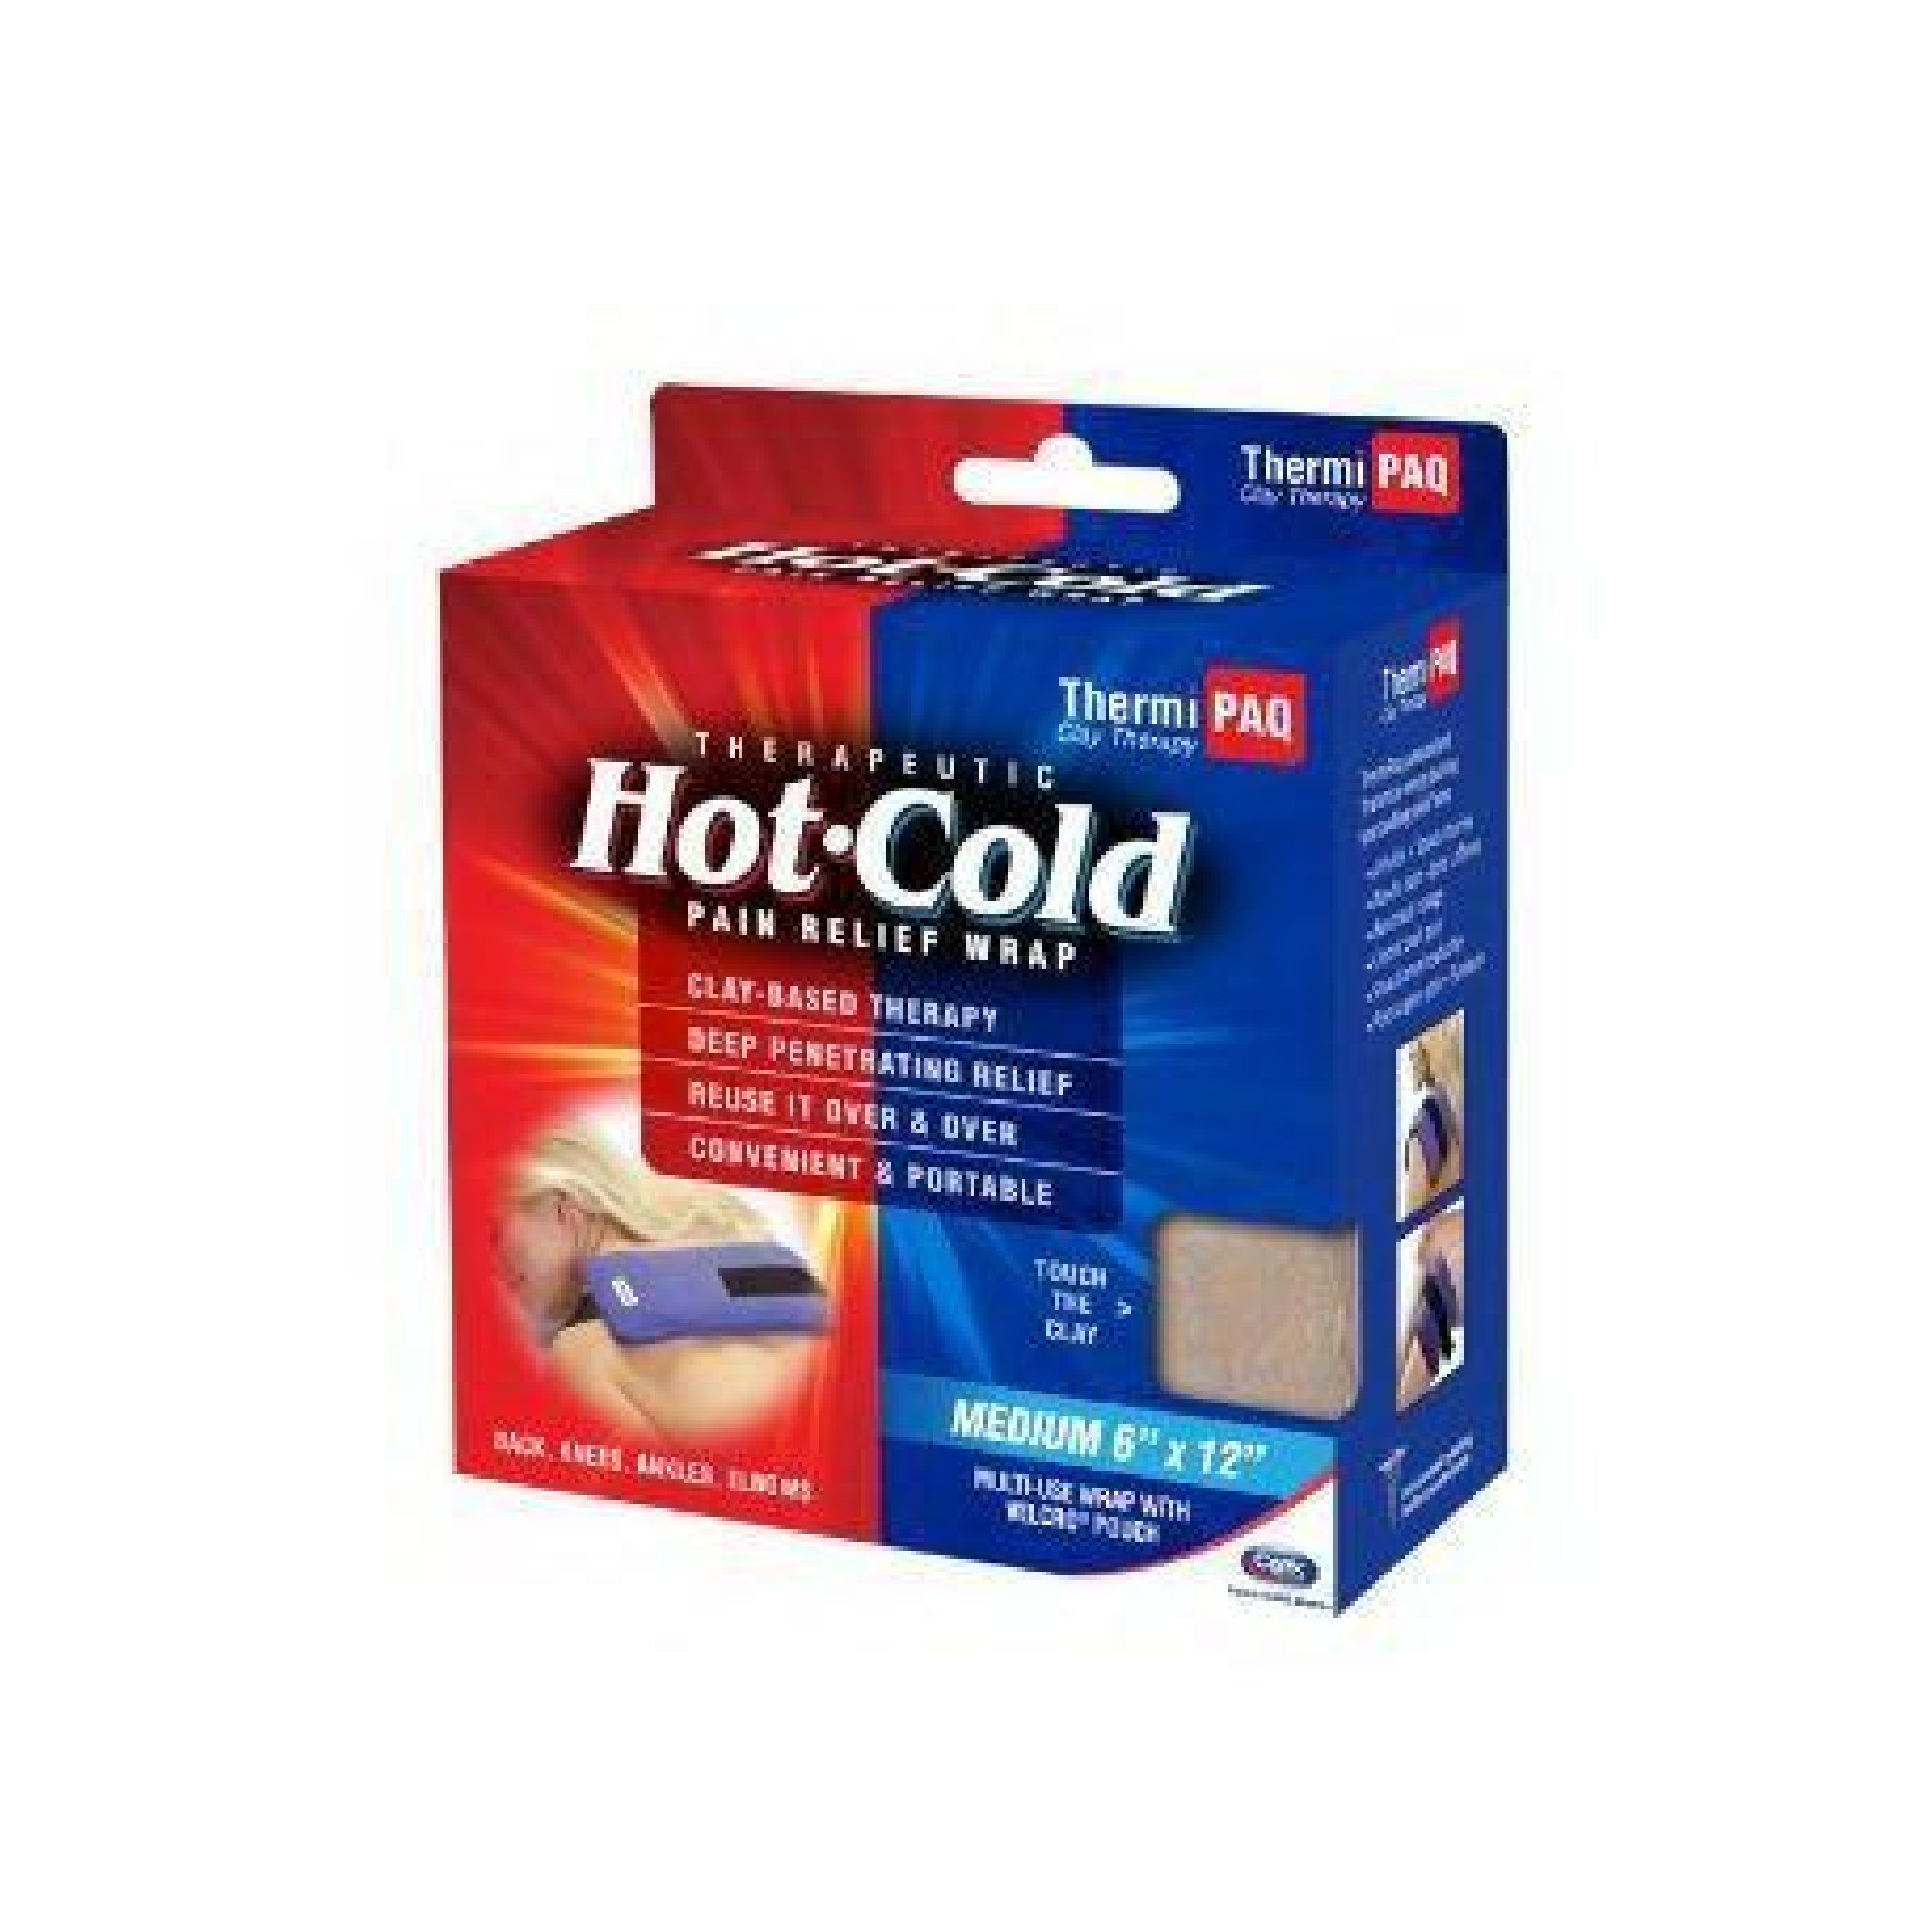 Thermipaq Hot Cold Wrap